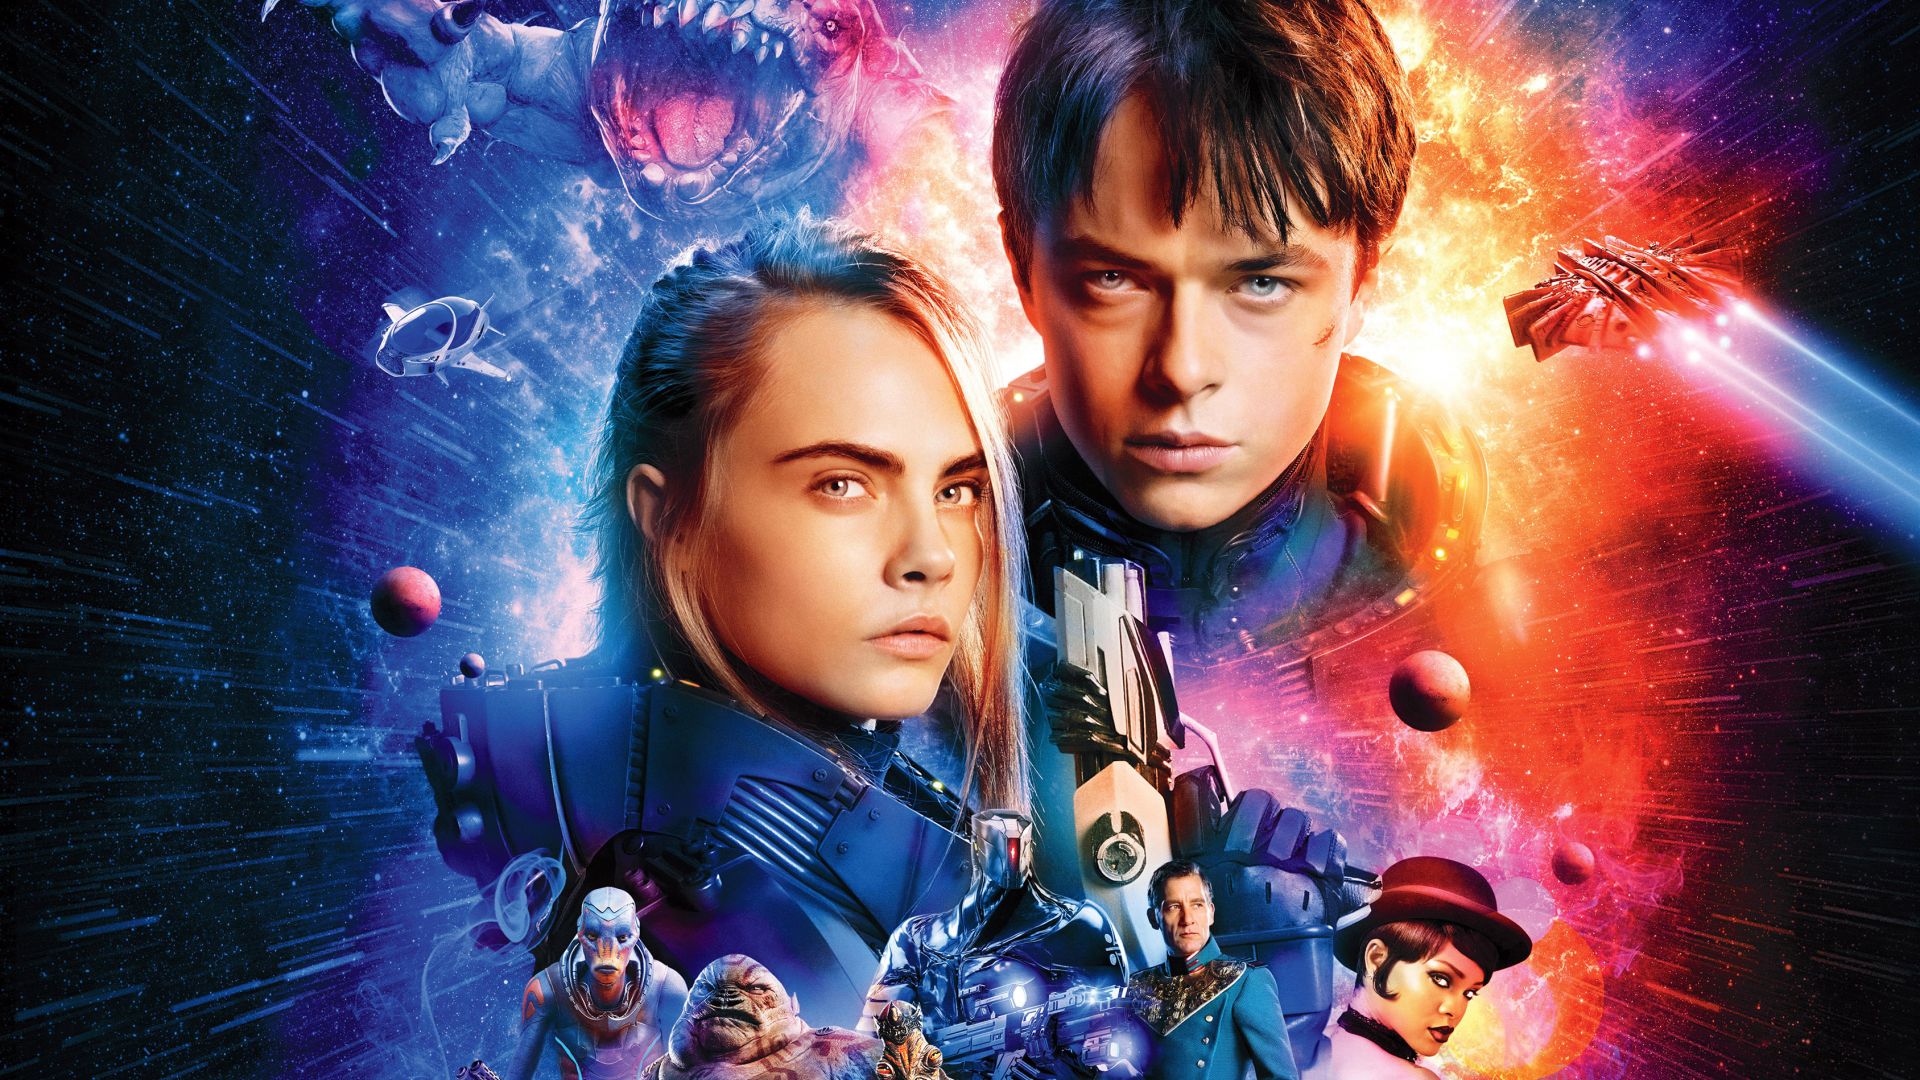 Wallpaper Valerian and Laureline, Valerian and the city of a thousand planets, 2017, poster, 4k